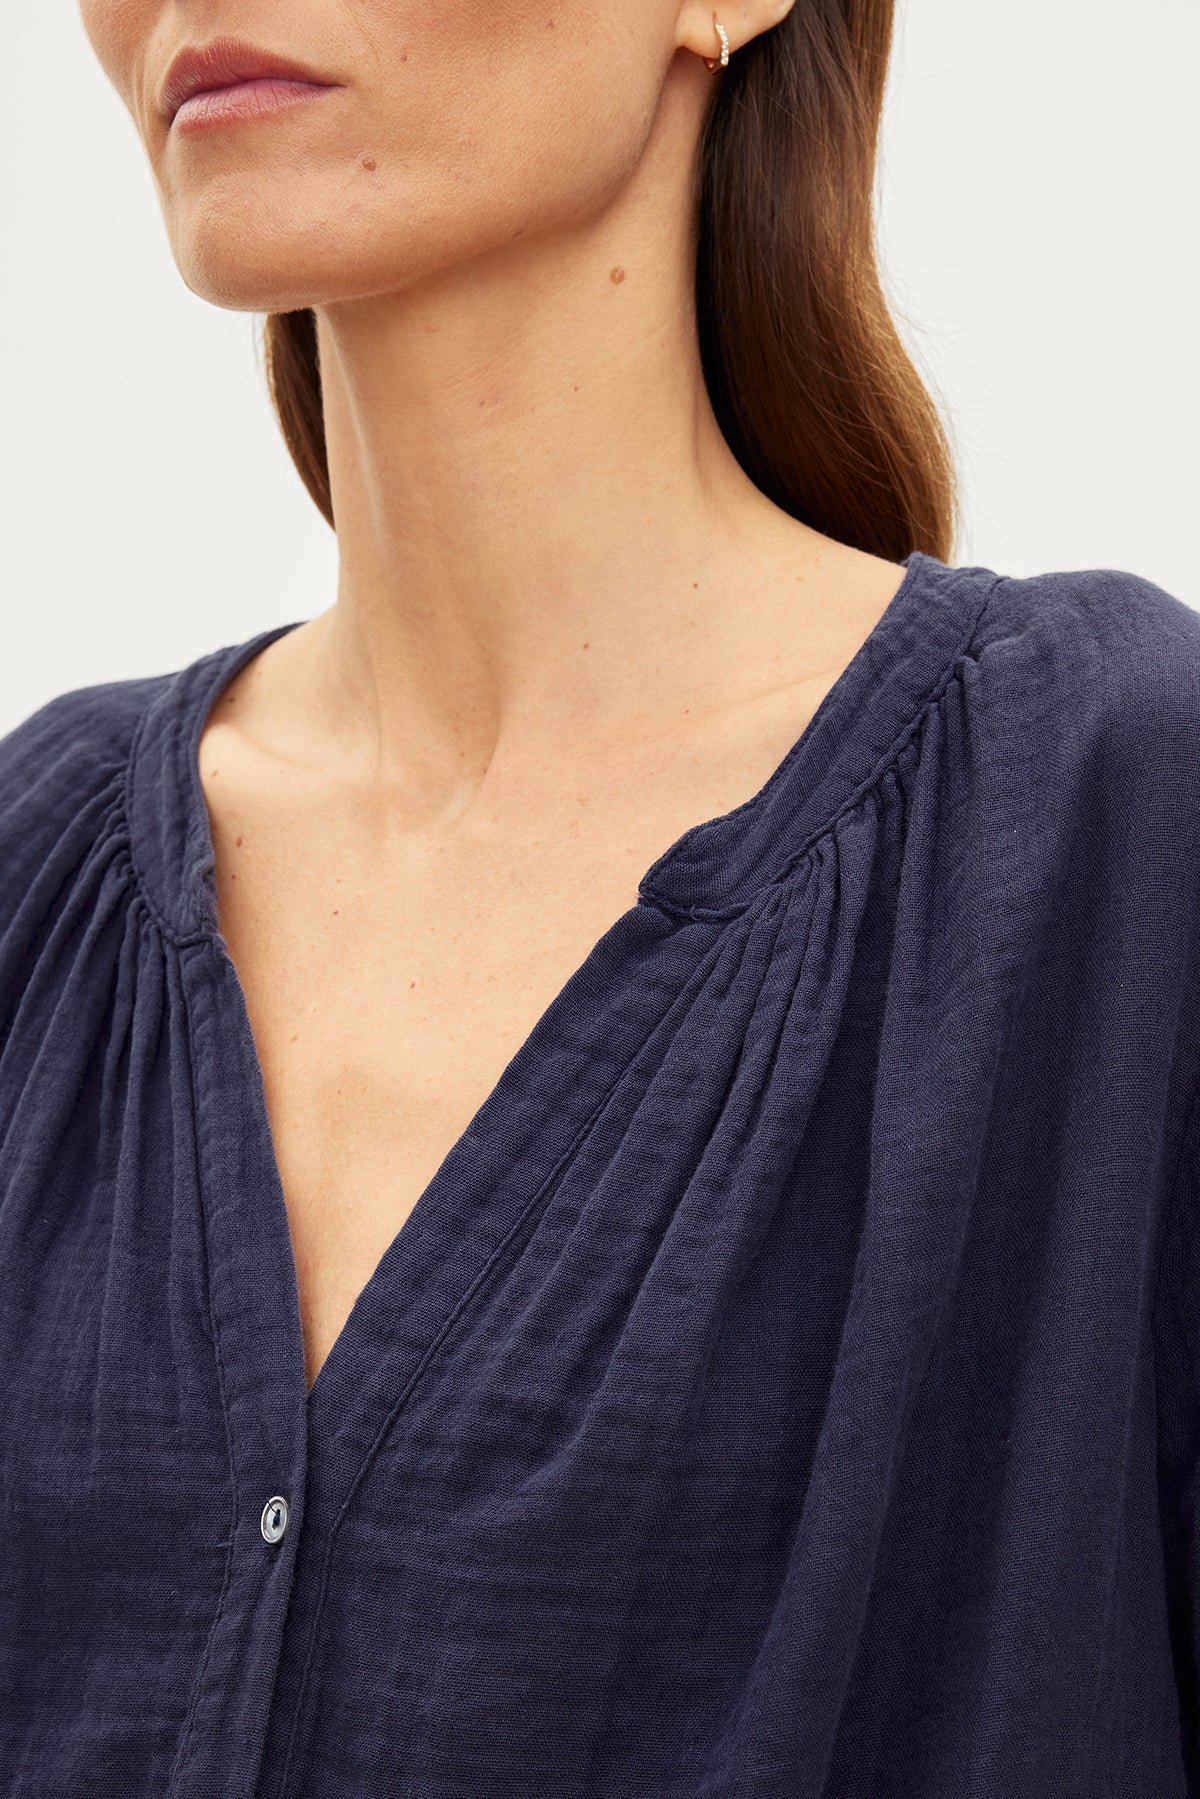 Close-up of a woman wearing the DEANN COTTON GAUZE TOP by Velvet by Graham & Spencer, which is a dark blue, cotton gauze top with a gathered v-neckline and button front. The image shows her from the neck to the mid-chest level, highlighting the texture and design of the blouse.-35955697549505